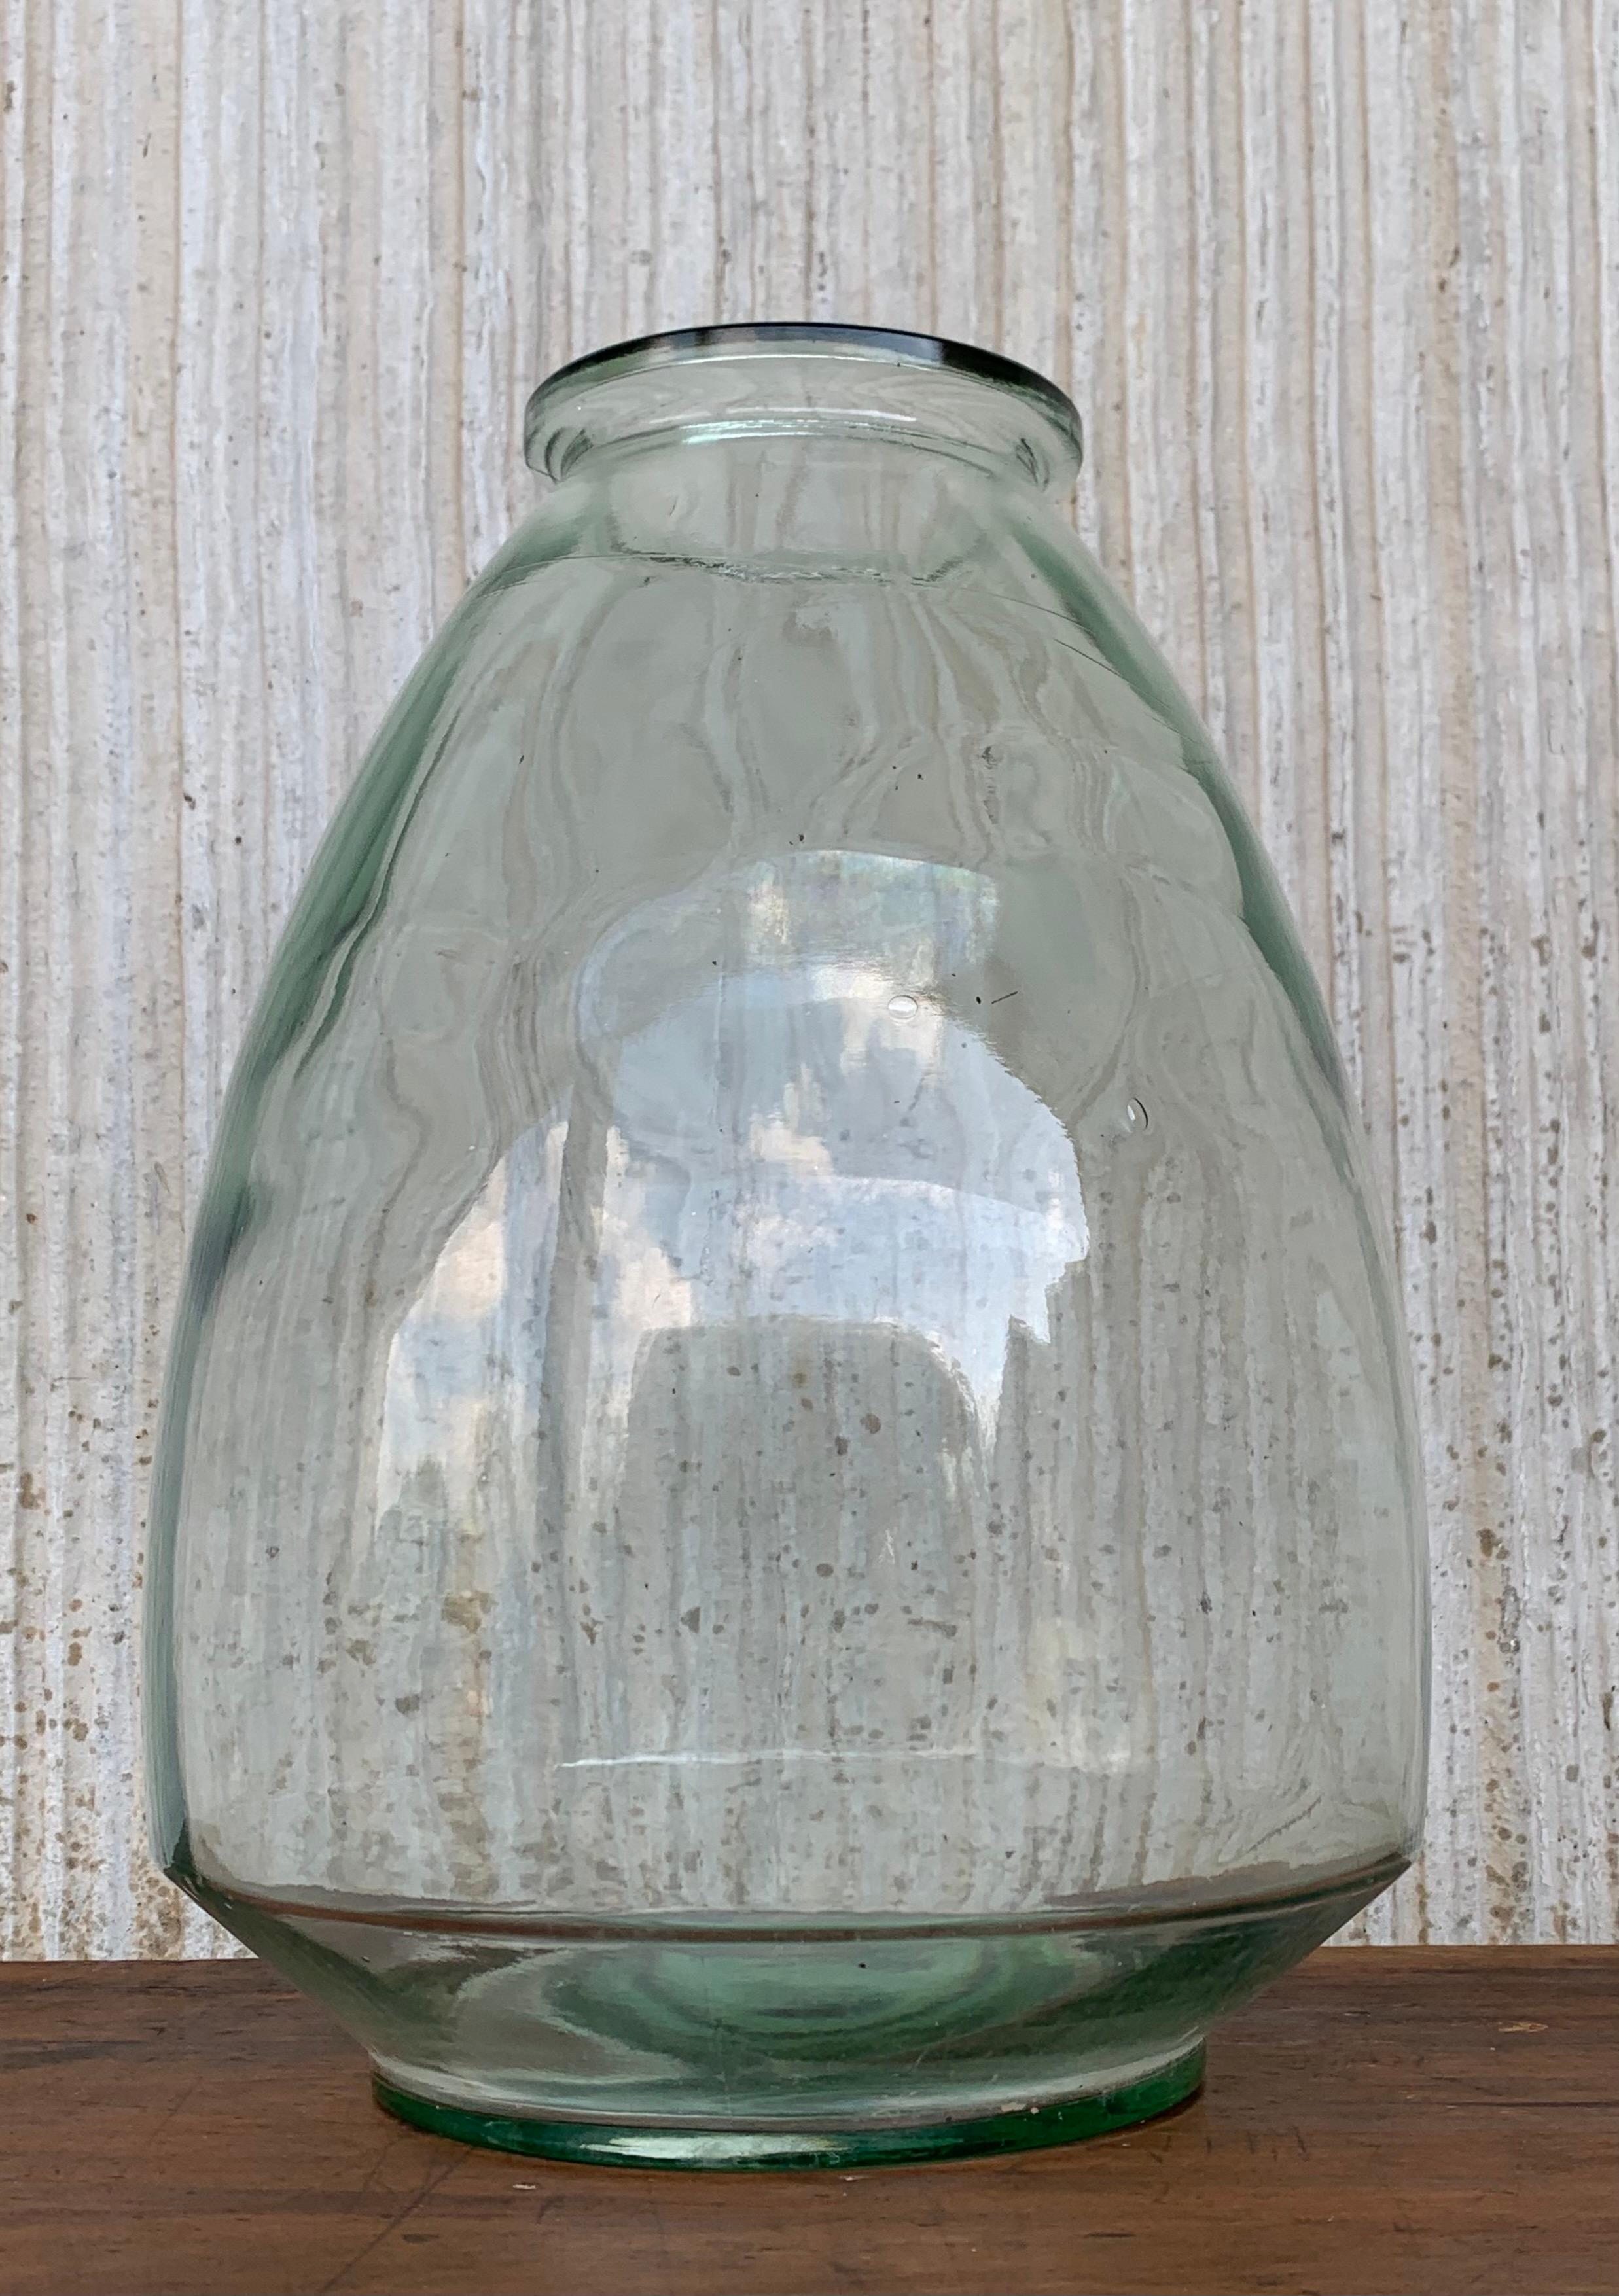 Early 1900 hundreds blown glass demijohn bottle, France. This huge outstanding vessel is tall and sturdy. It's large mouth allows the bottle to hold a large bundle of flowers as well as an abundance of liquids. The clear glass is a wonderful example